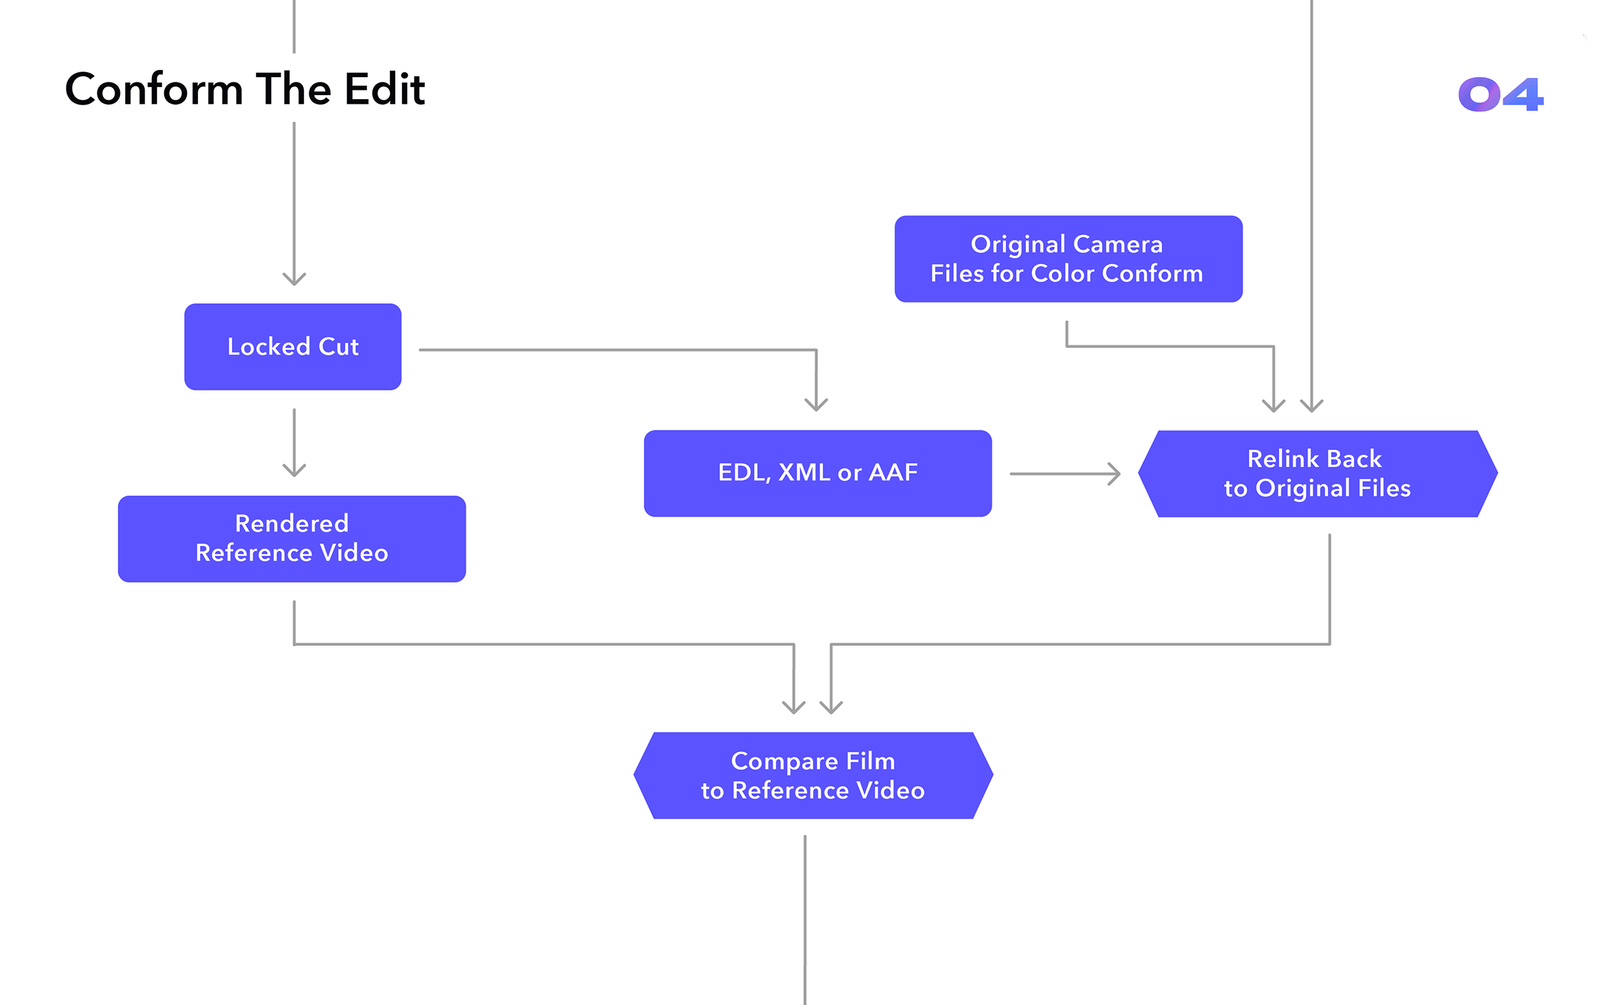 Video Editing Workflow Chart